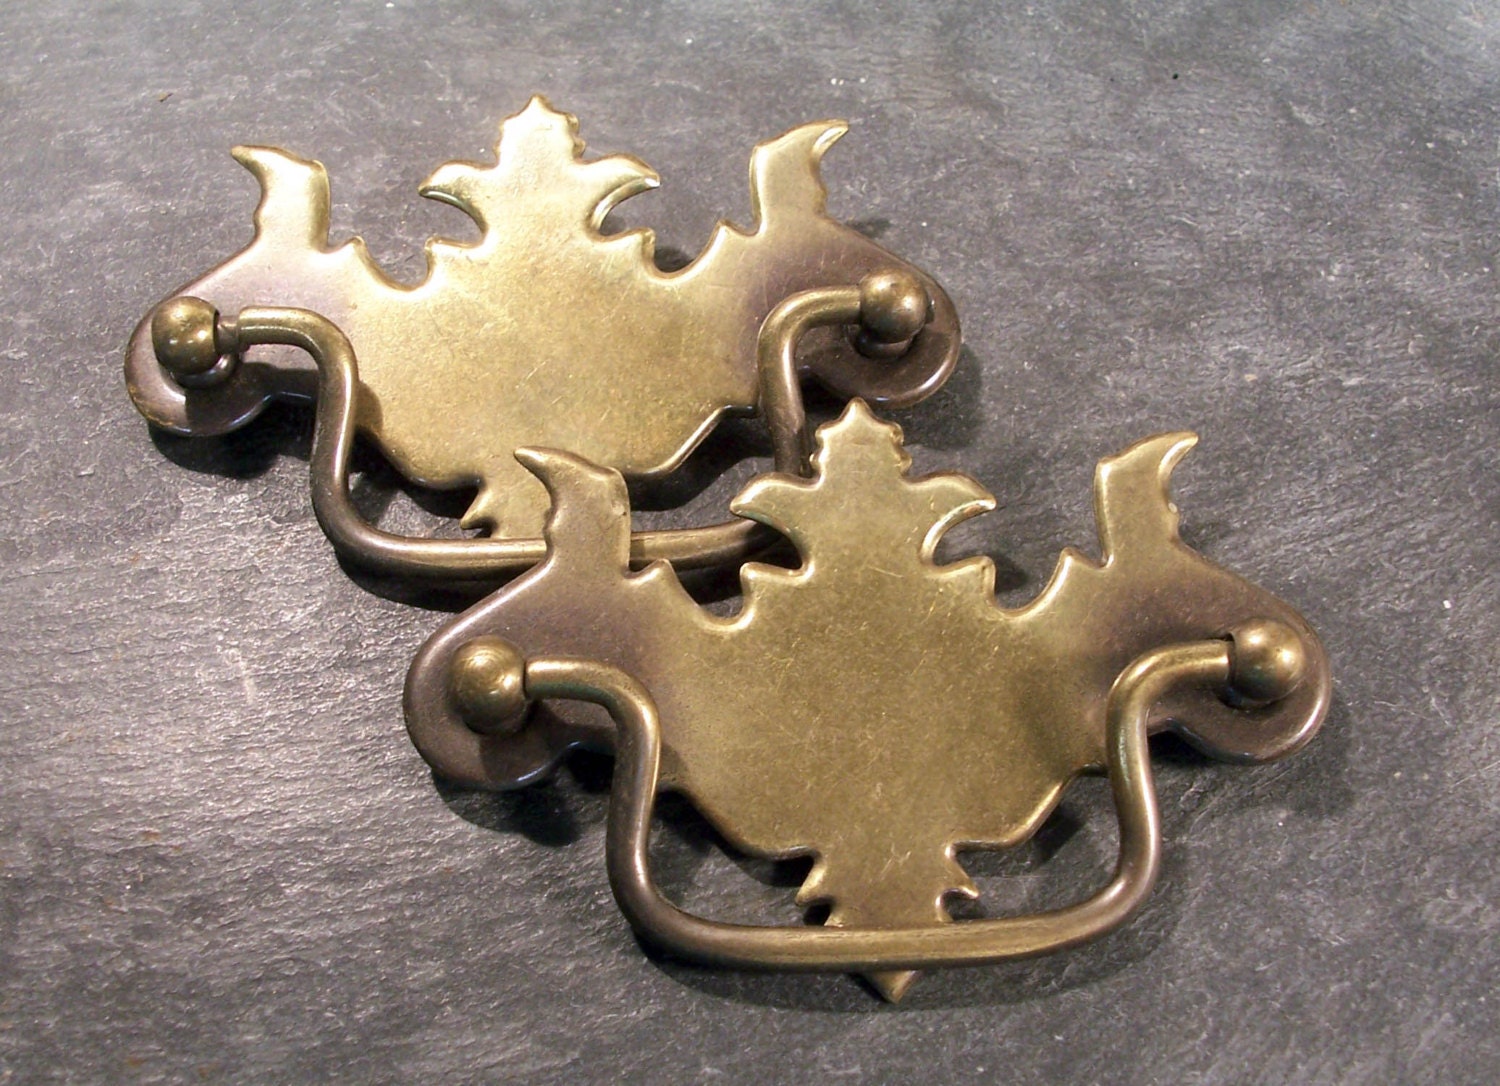 VINTAGE Ornate Chippendale Brass Drawer Pulls Antique by punksrus